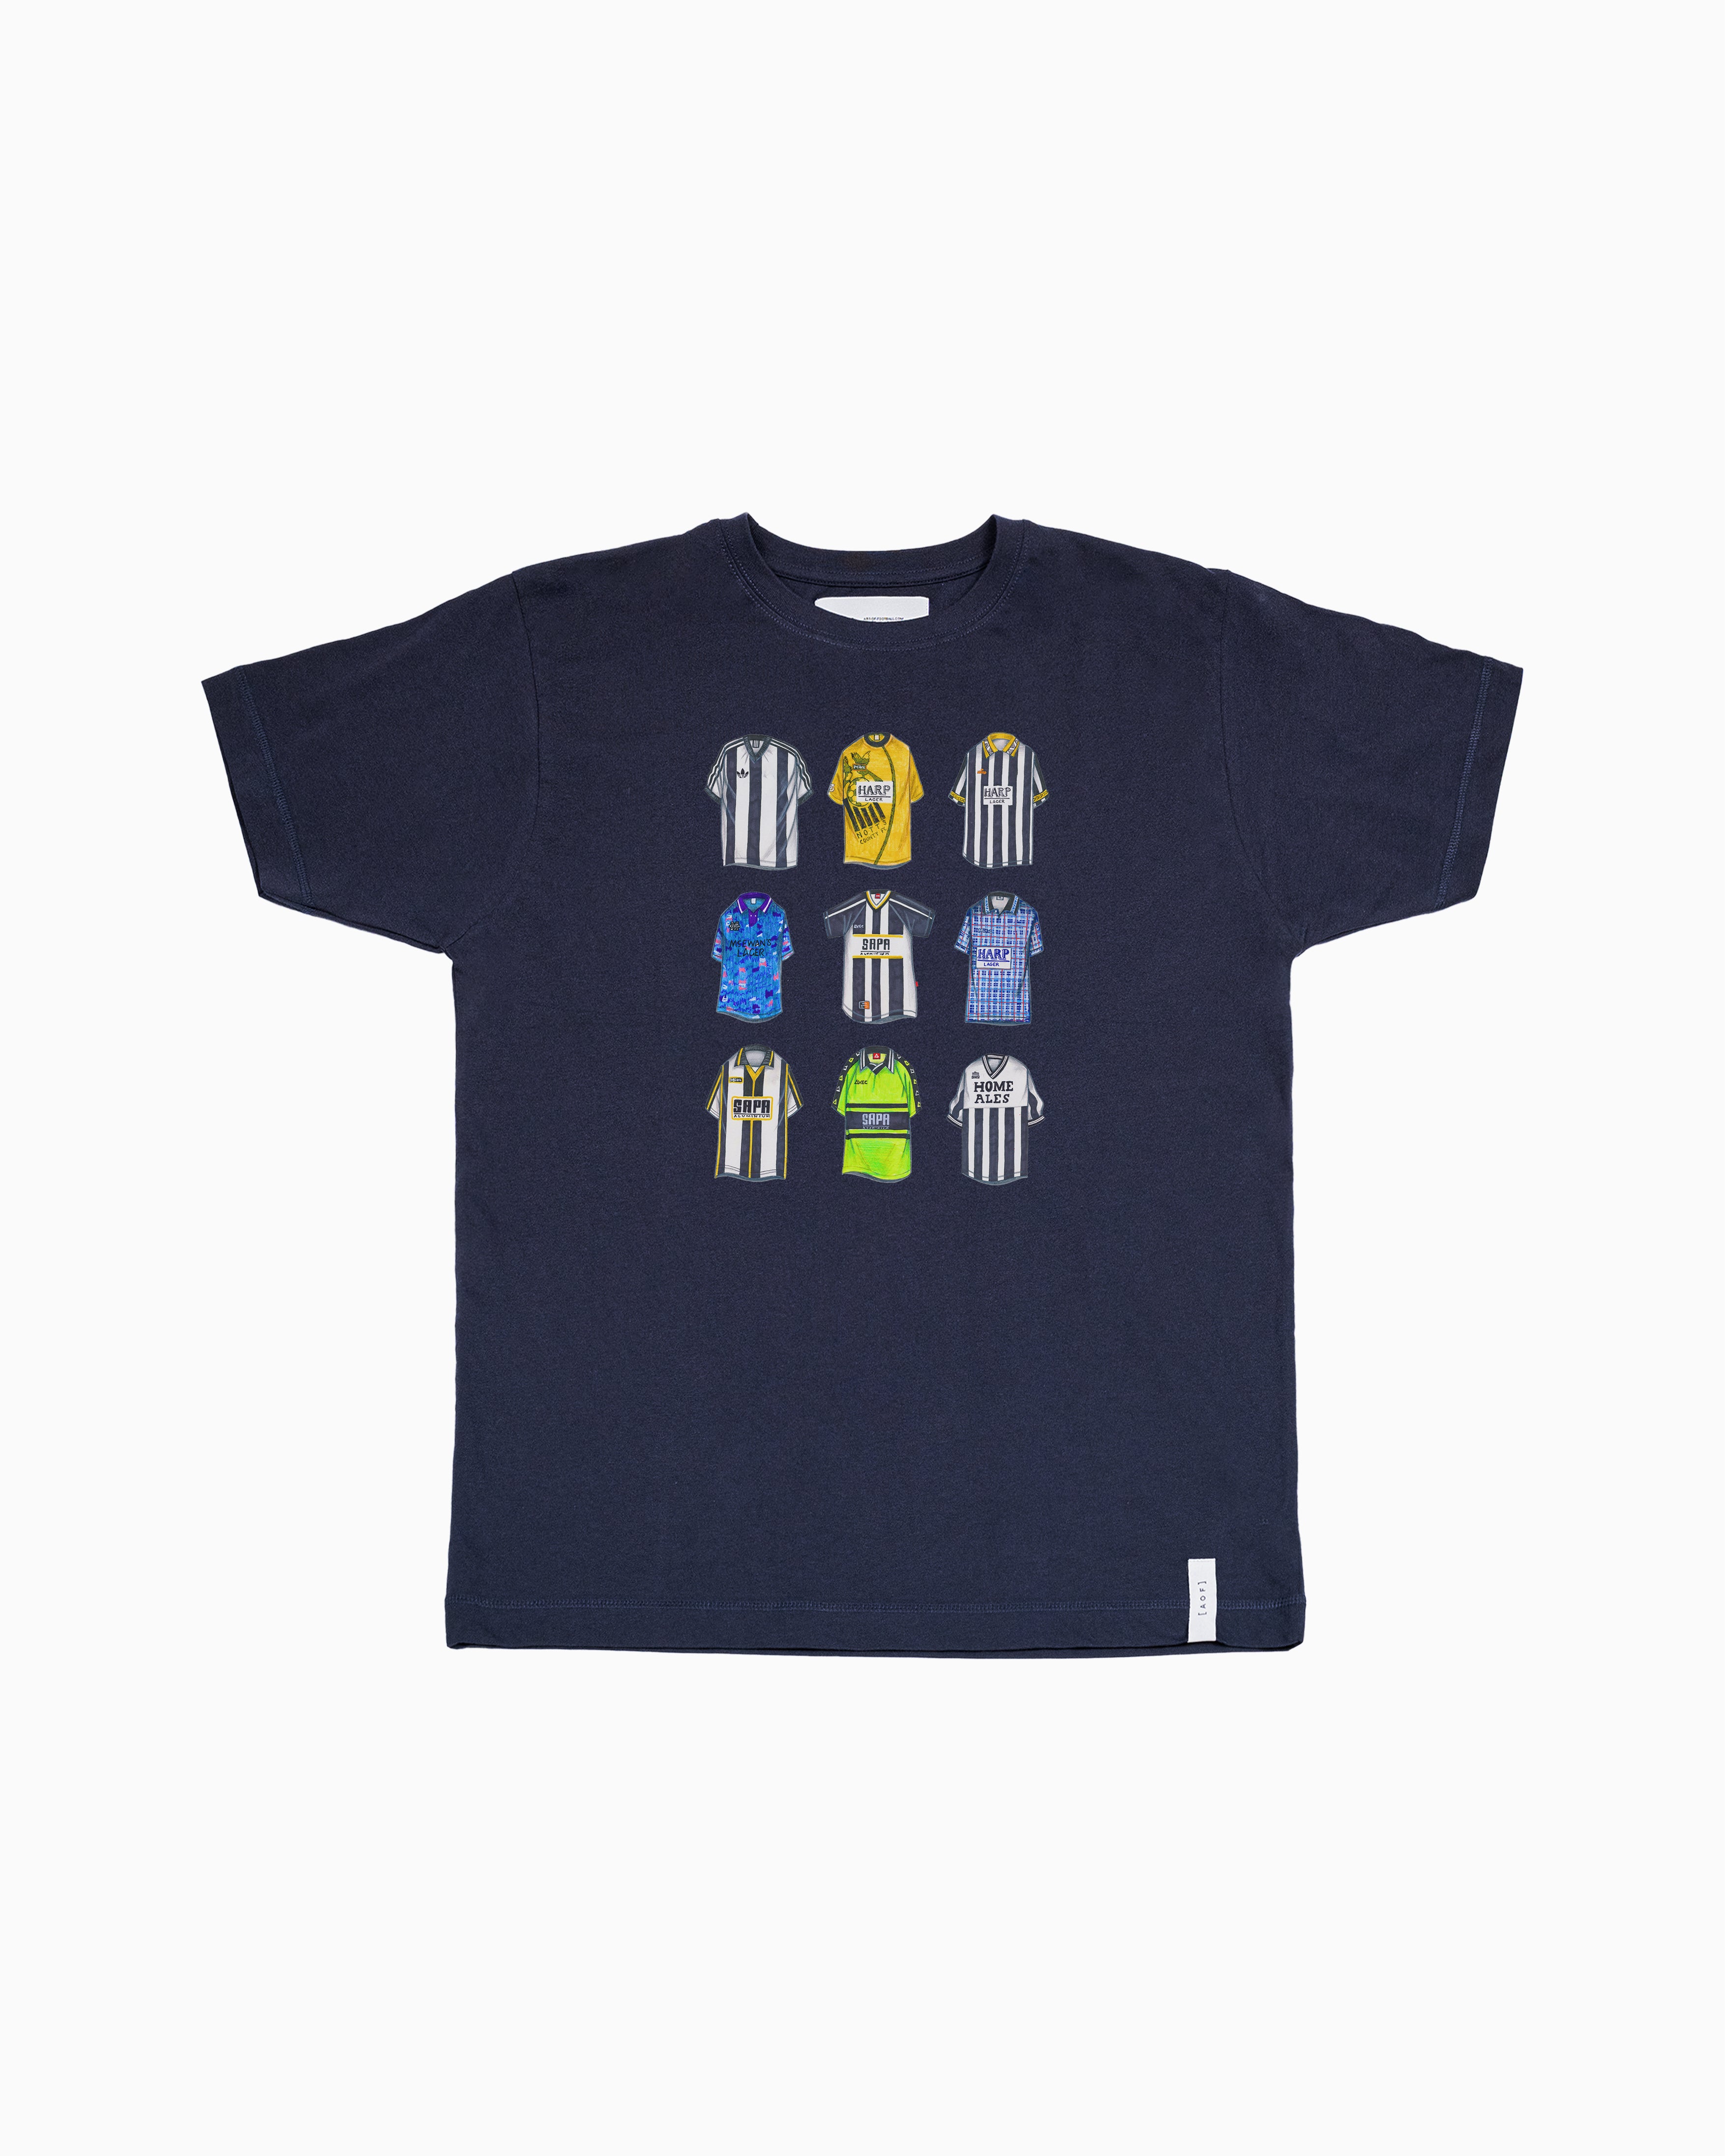 Magpies Classics - Tee or Sweat